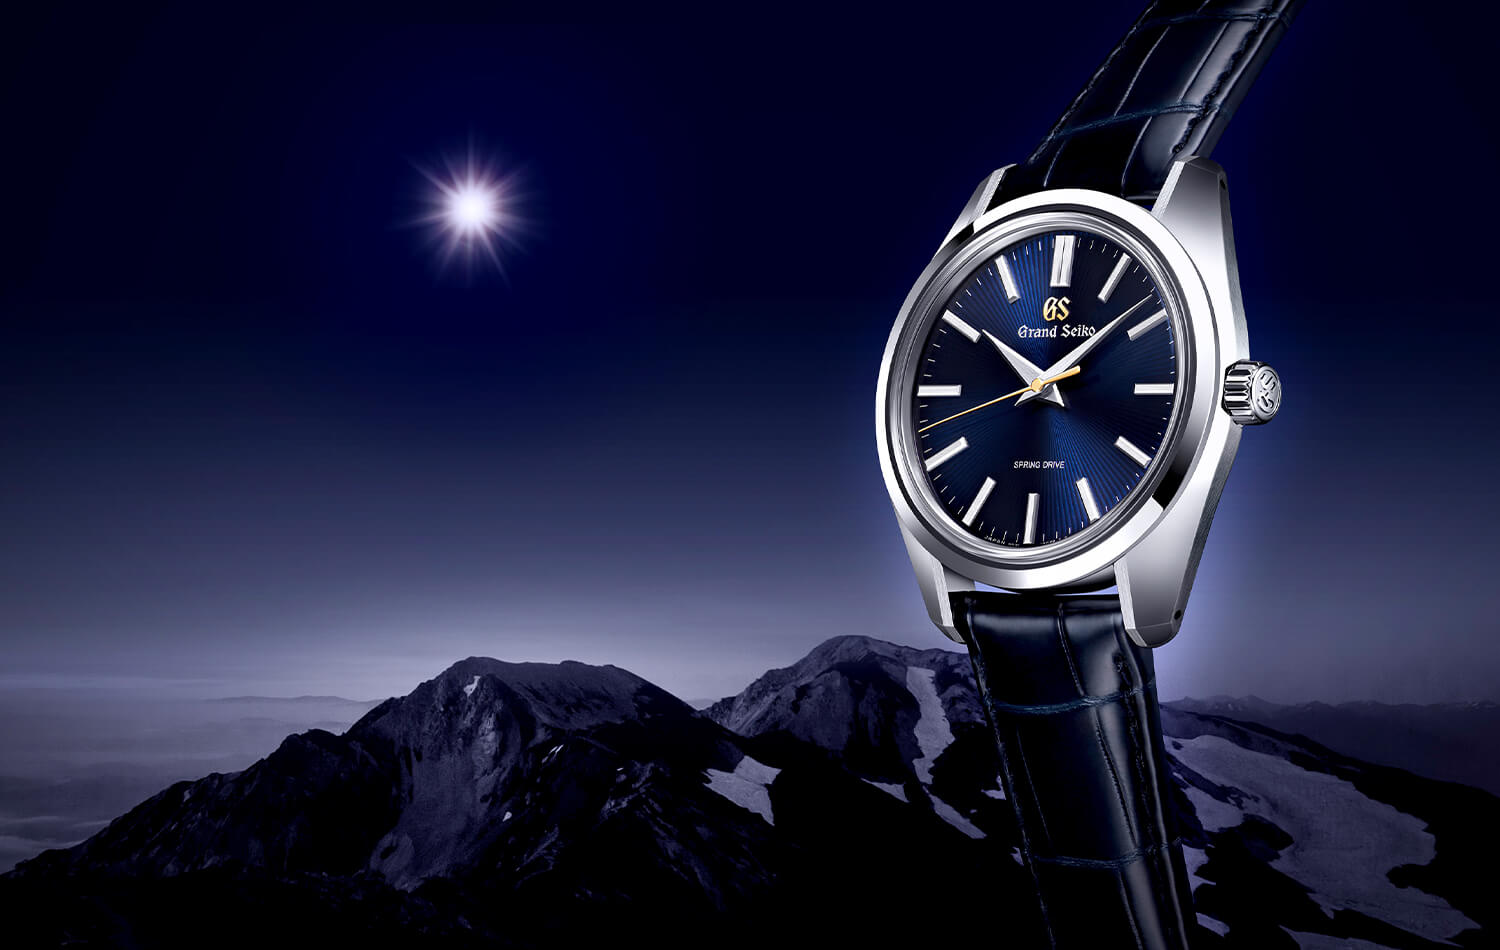 Celebrating 55 Years of the Grand Seiko Style with a new Spring Drive  creation inspired by the moon over the Shinshu mountains | Grand Seiko